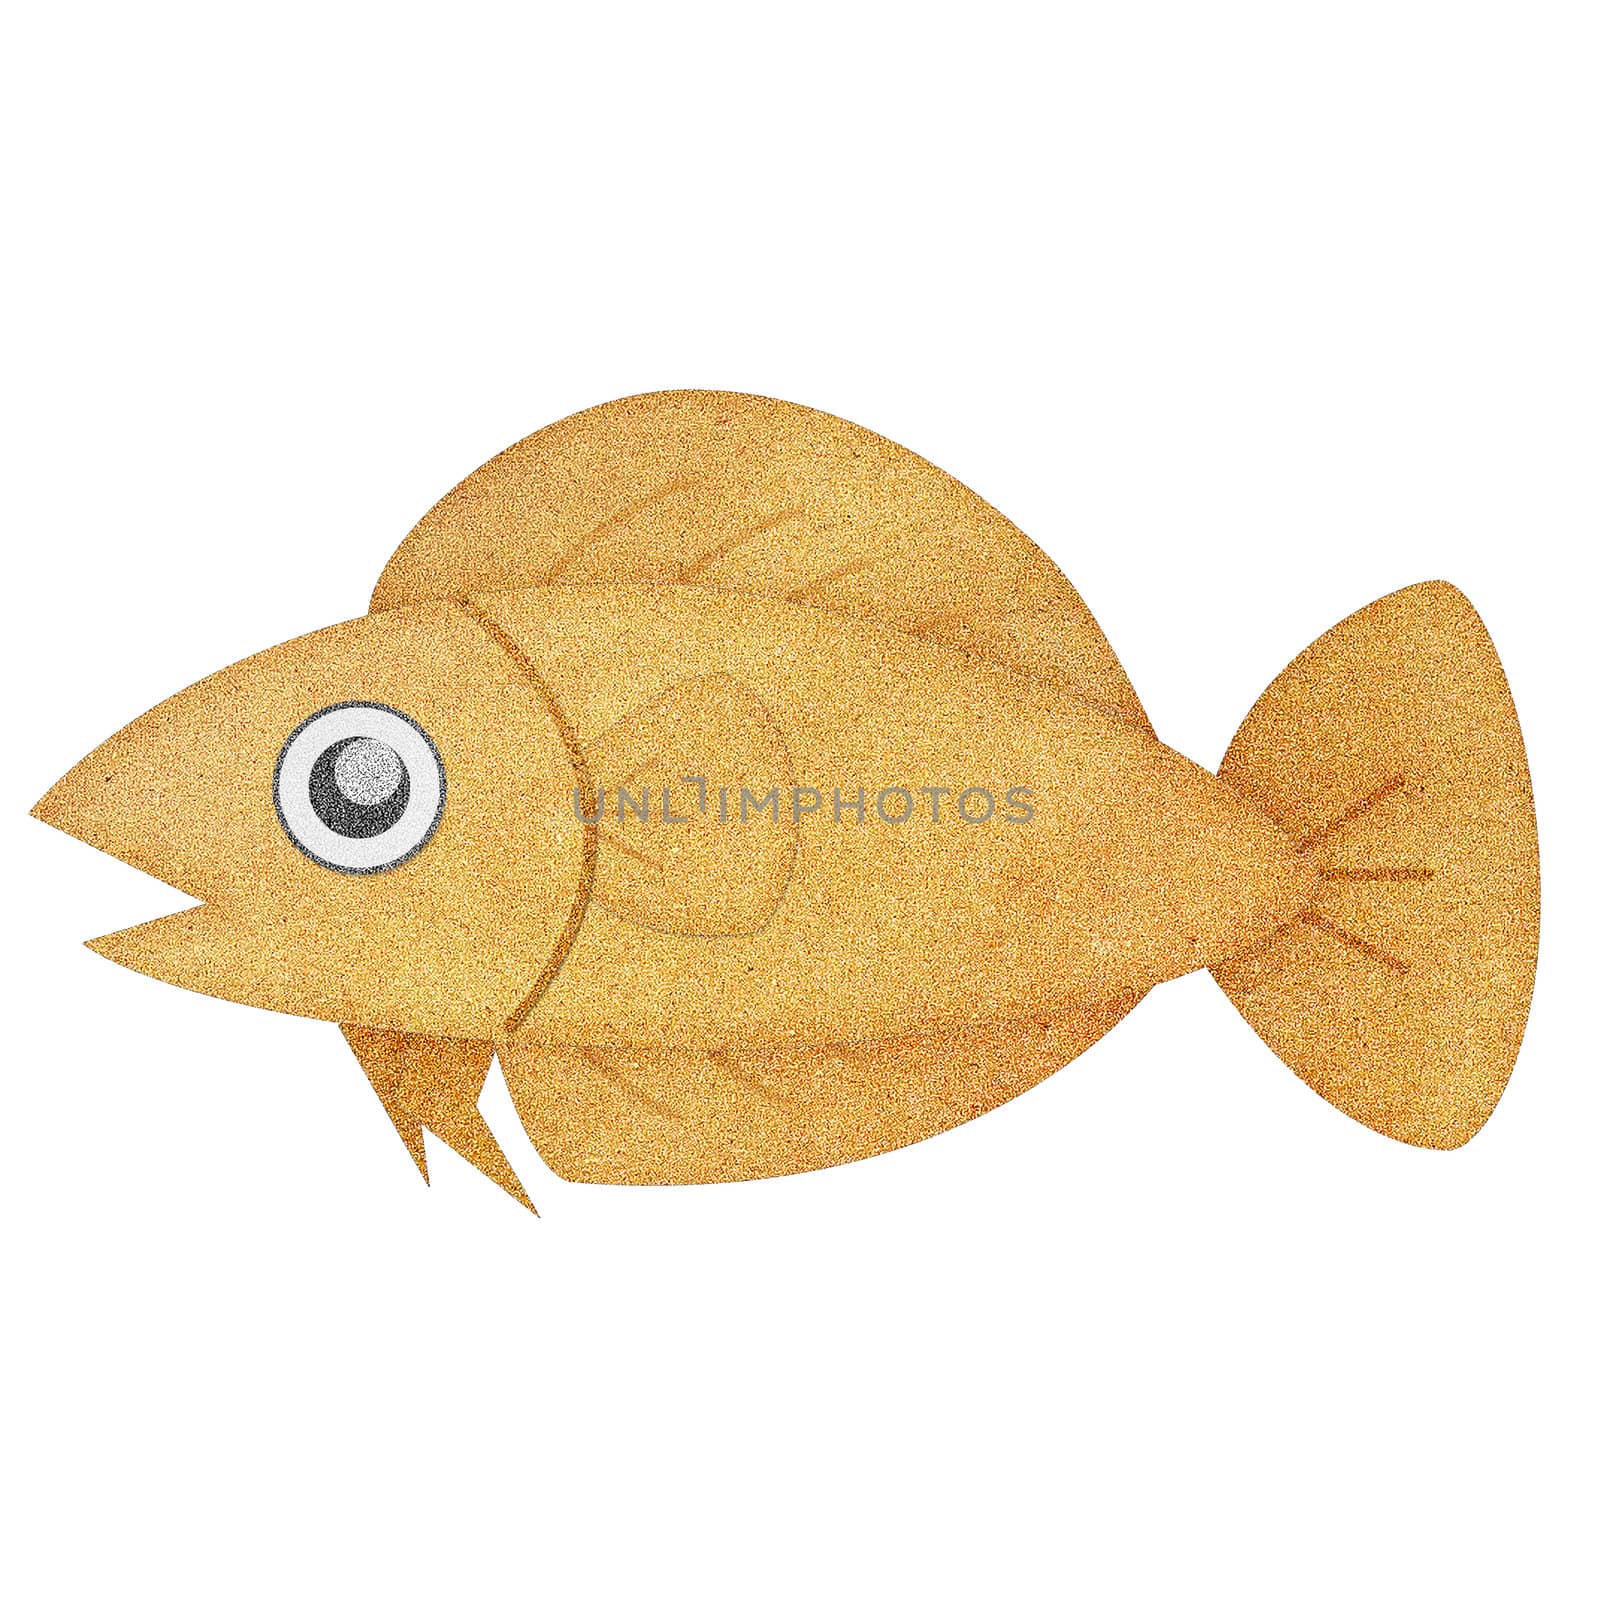 Recycled paper texture fish illustration isolated on white by jakgree